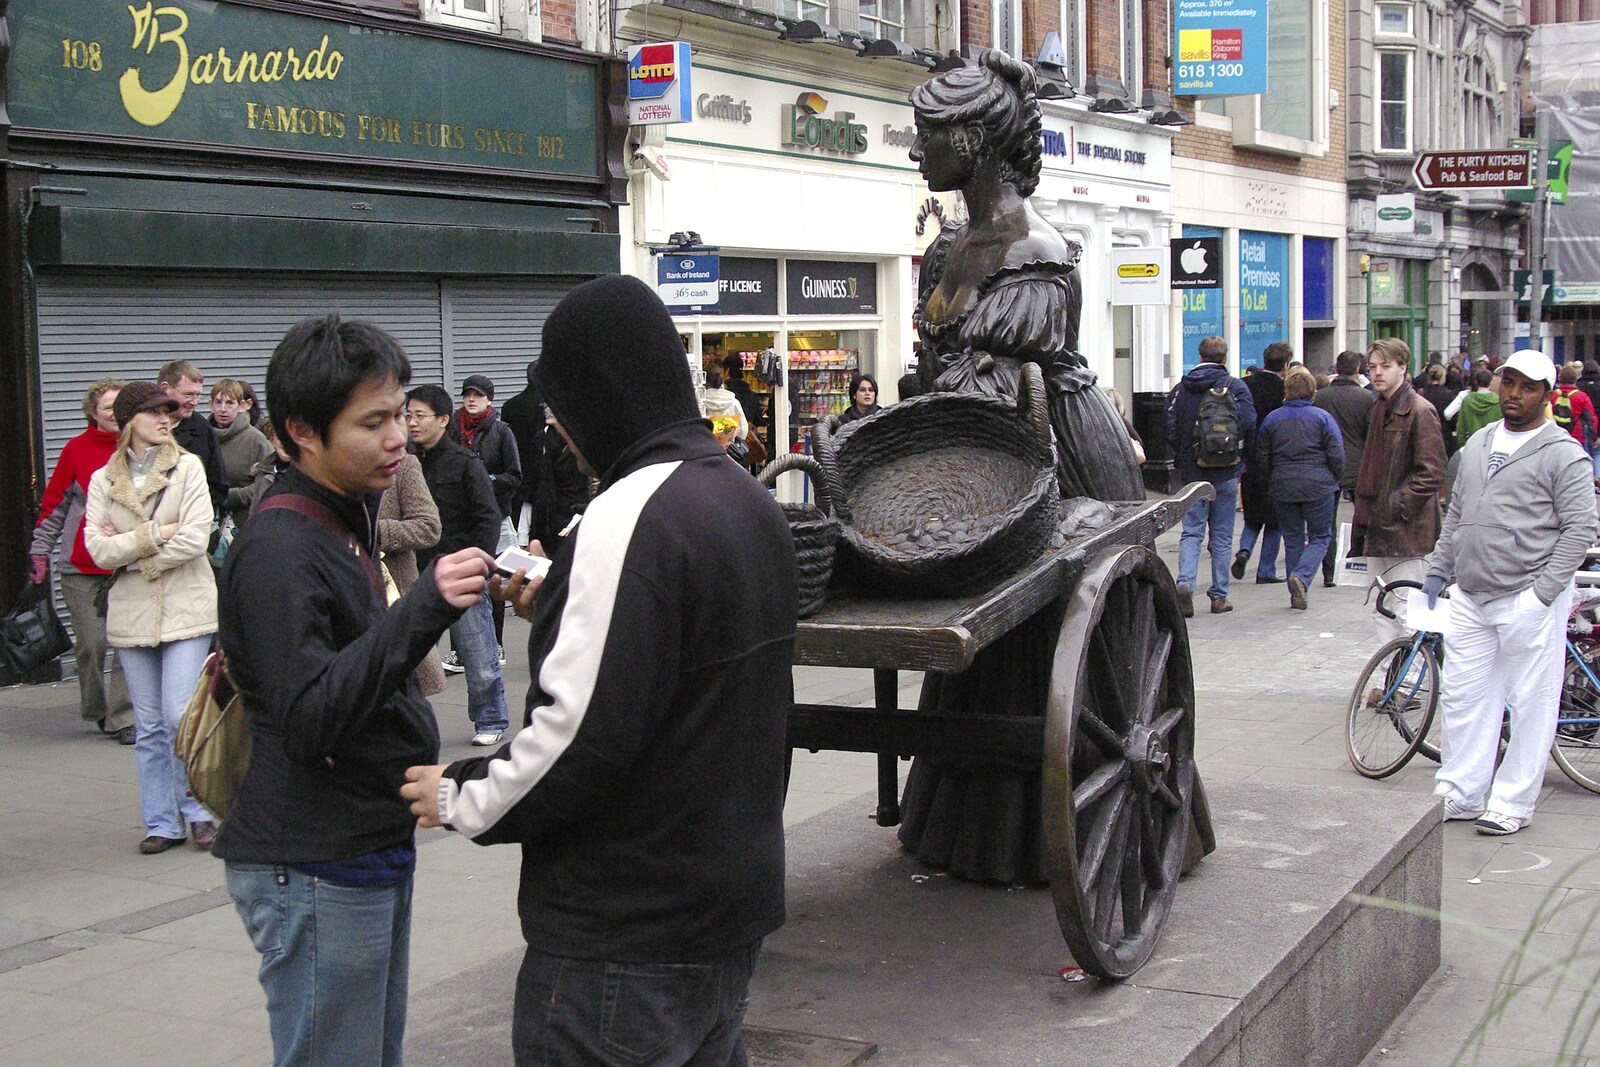 The Molly Malone statue in Dublin from Easter in Dublin, Ireland - 21st March 2008